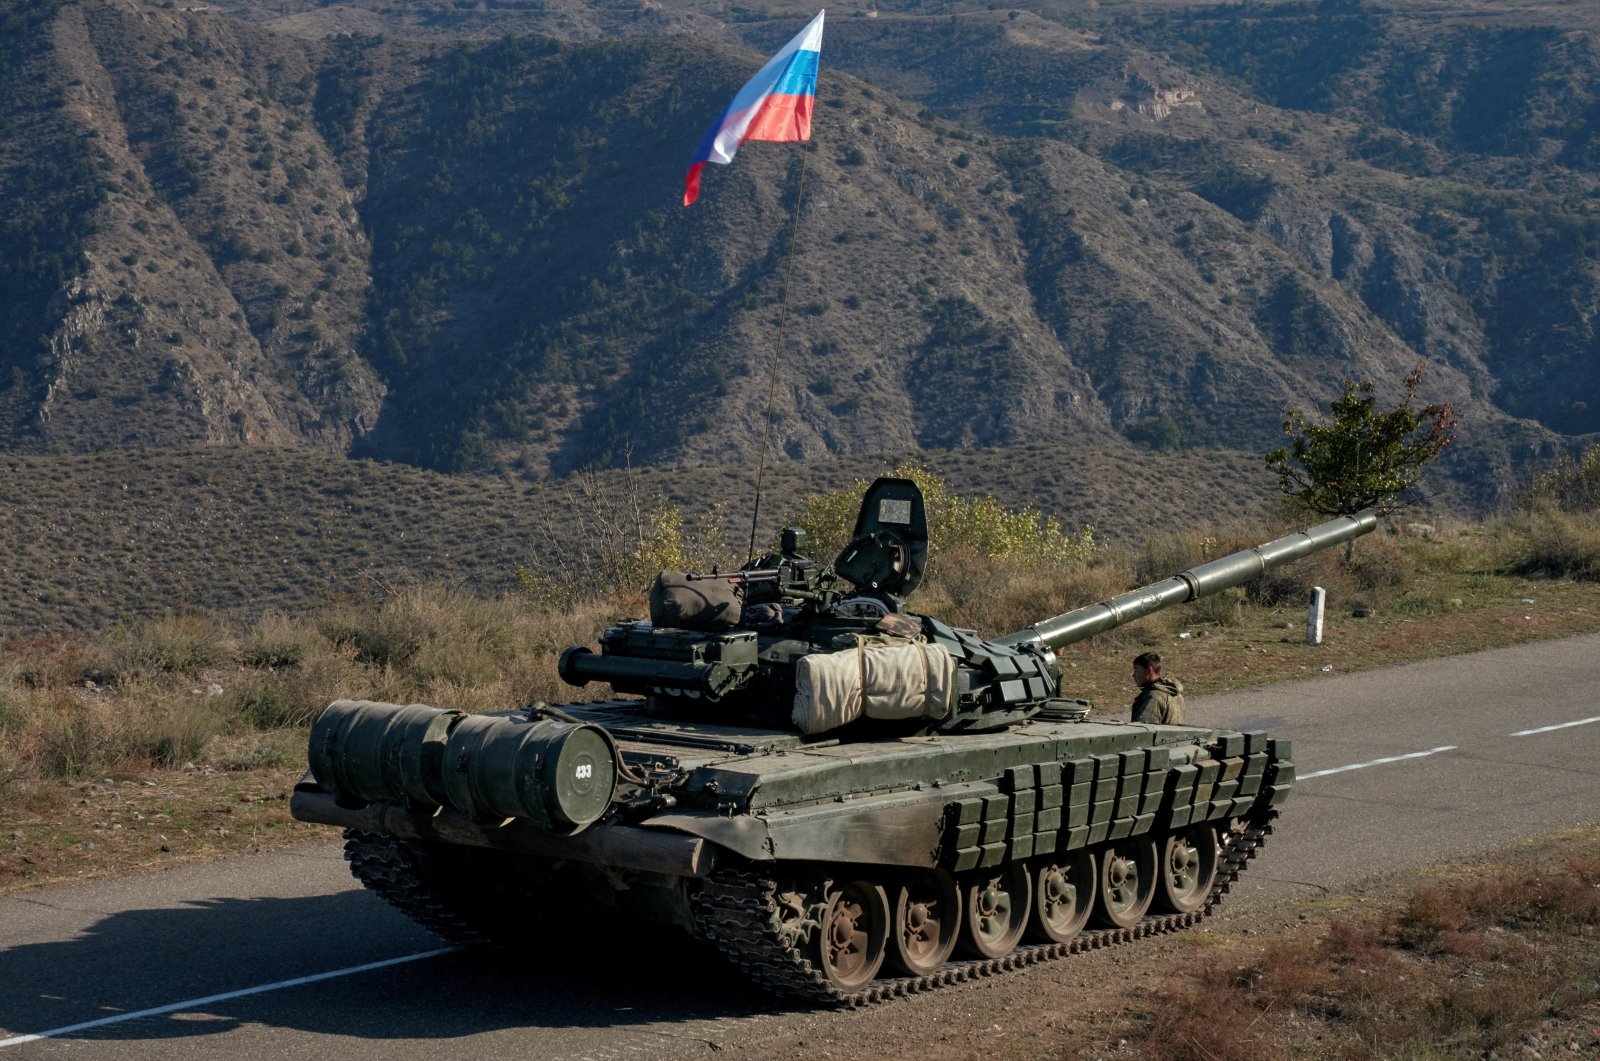 A member of the Russian peacekeeping troops stands next to a tank near the border with Armenia in the region of Nagorno-Karabakh, Azerbaijan, Nov. 10, 2020. (REUTERS Photo)